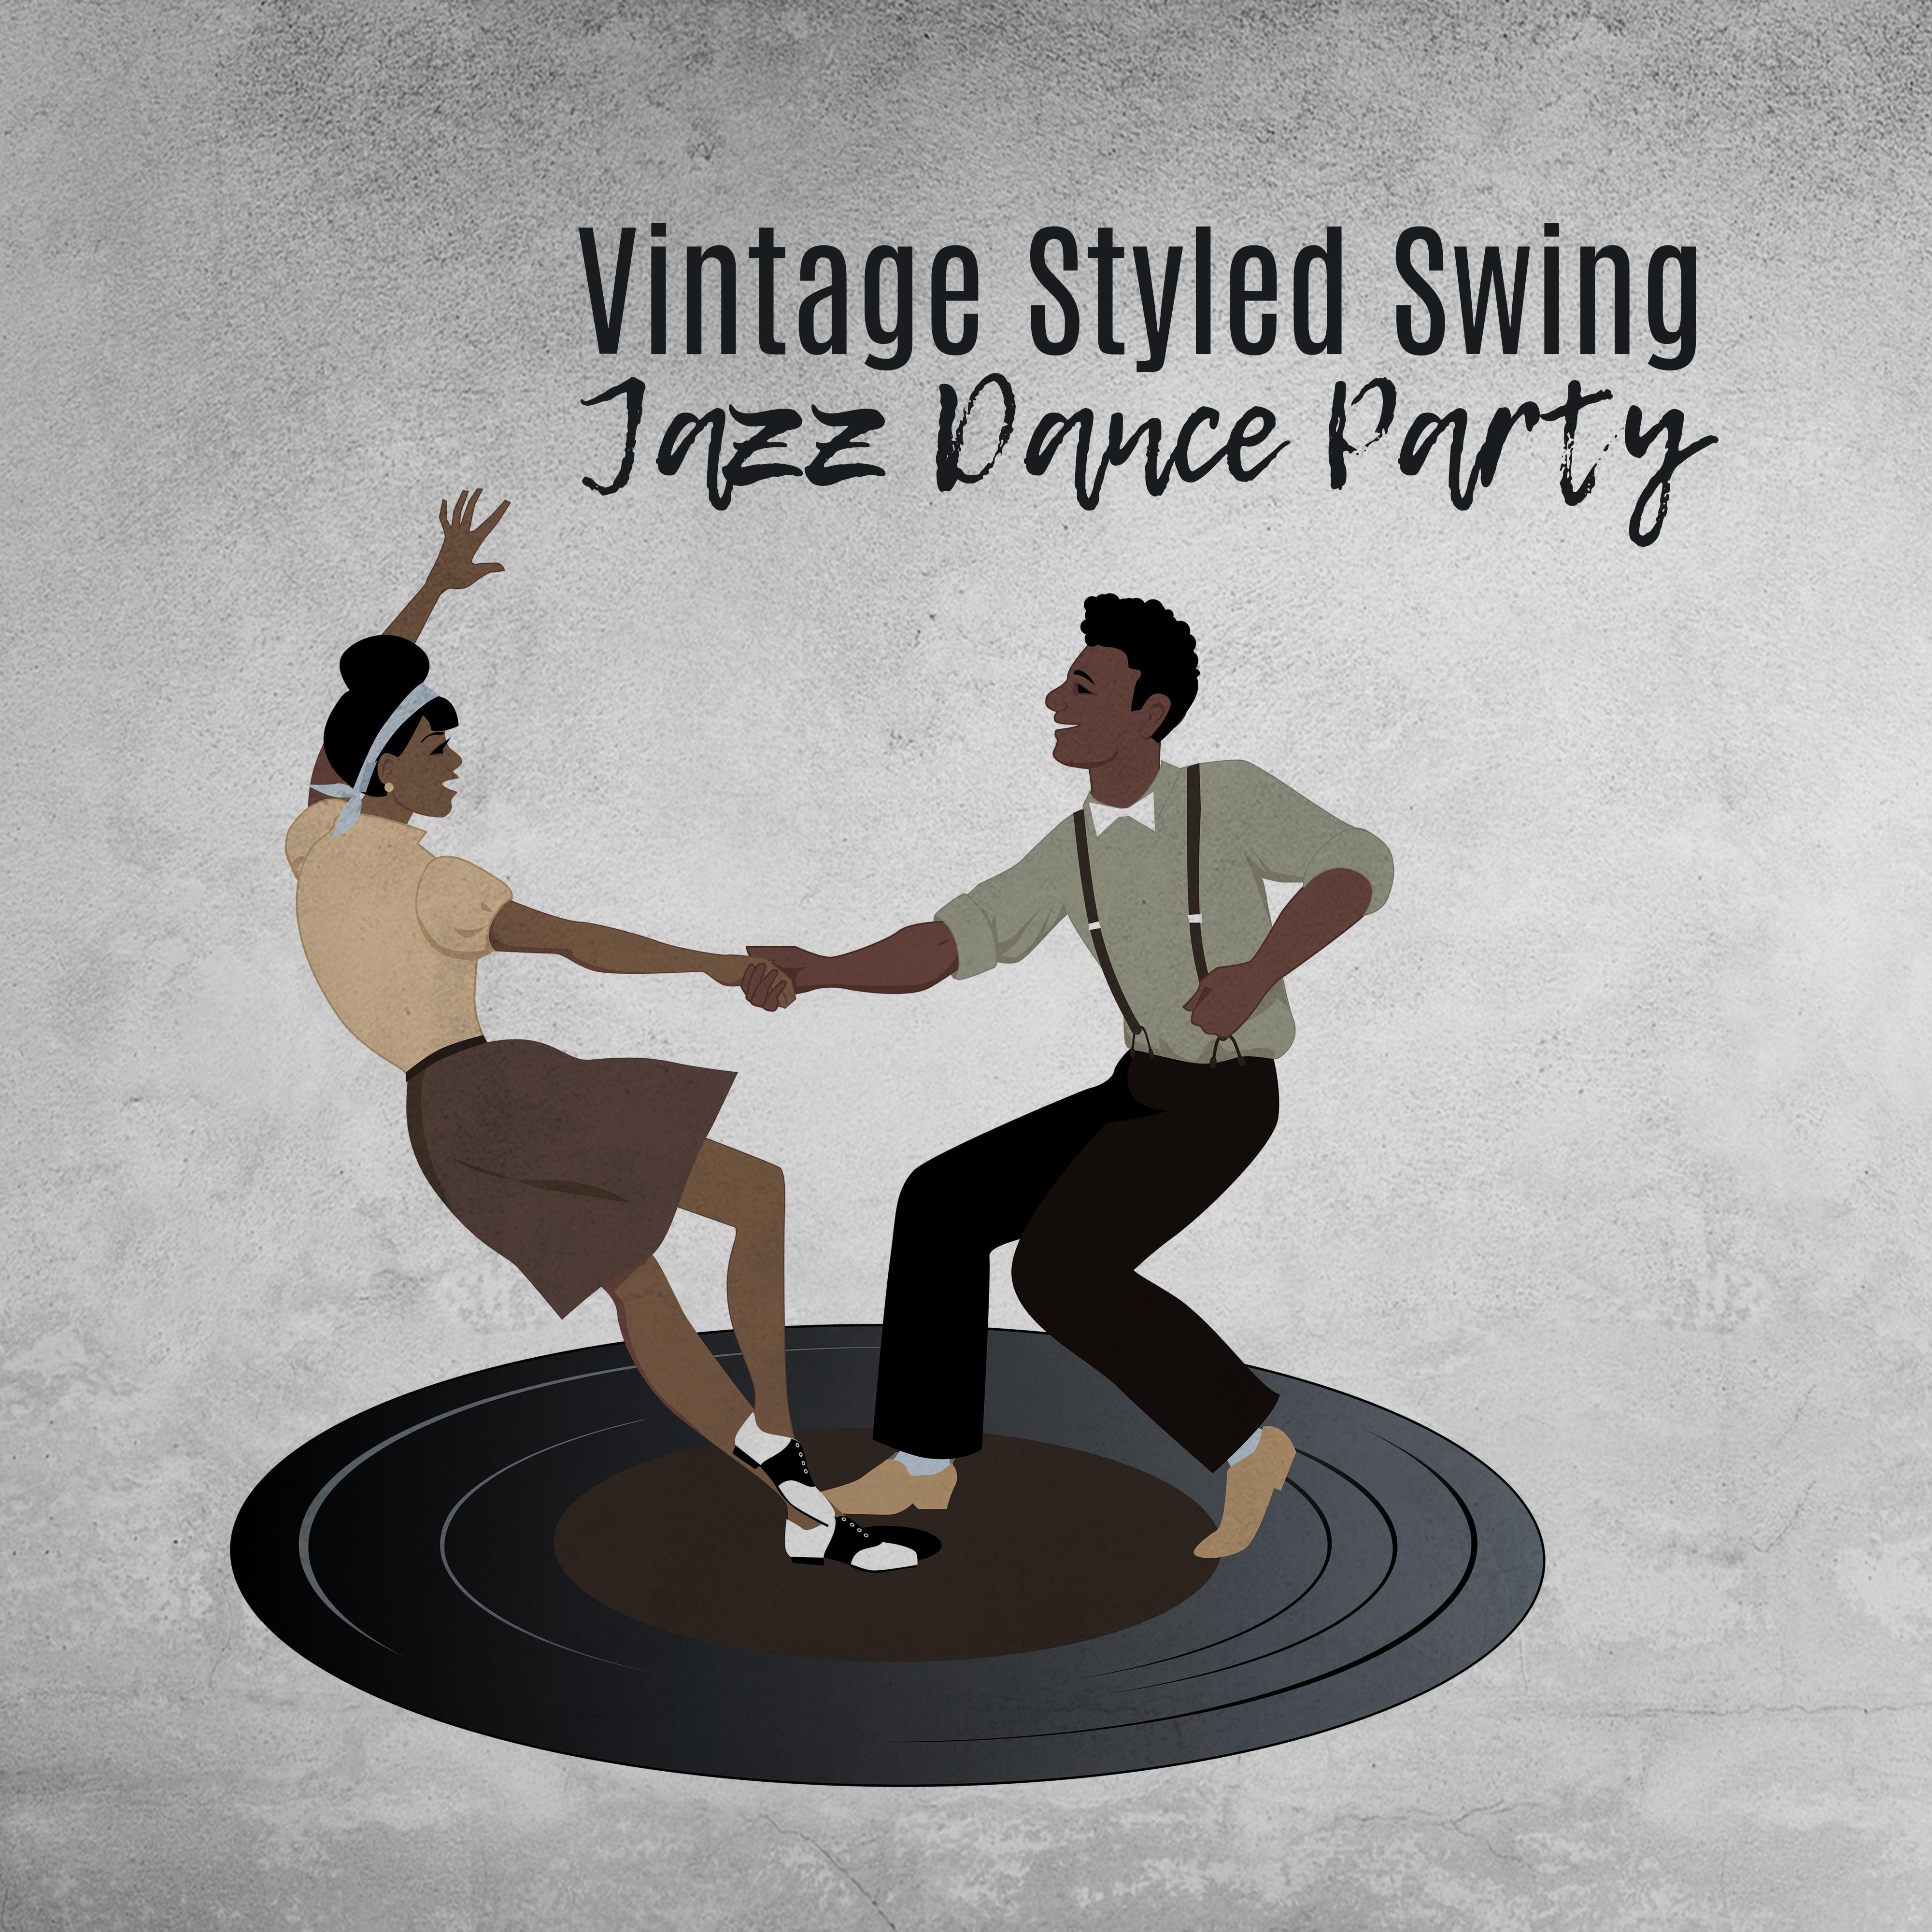 Vintage Styled Swing Jazz Dance Party: 2019 Instrumental Smooth Jazz Perfect for Oldschool Swing Party, Dancing All Night Long, Vintage Music with Sounds of Piano, Trumpet, Contrabass & Many More